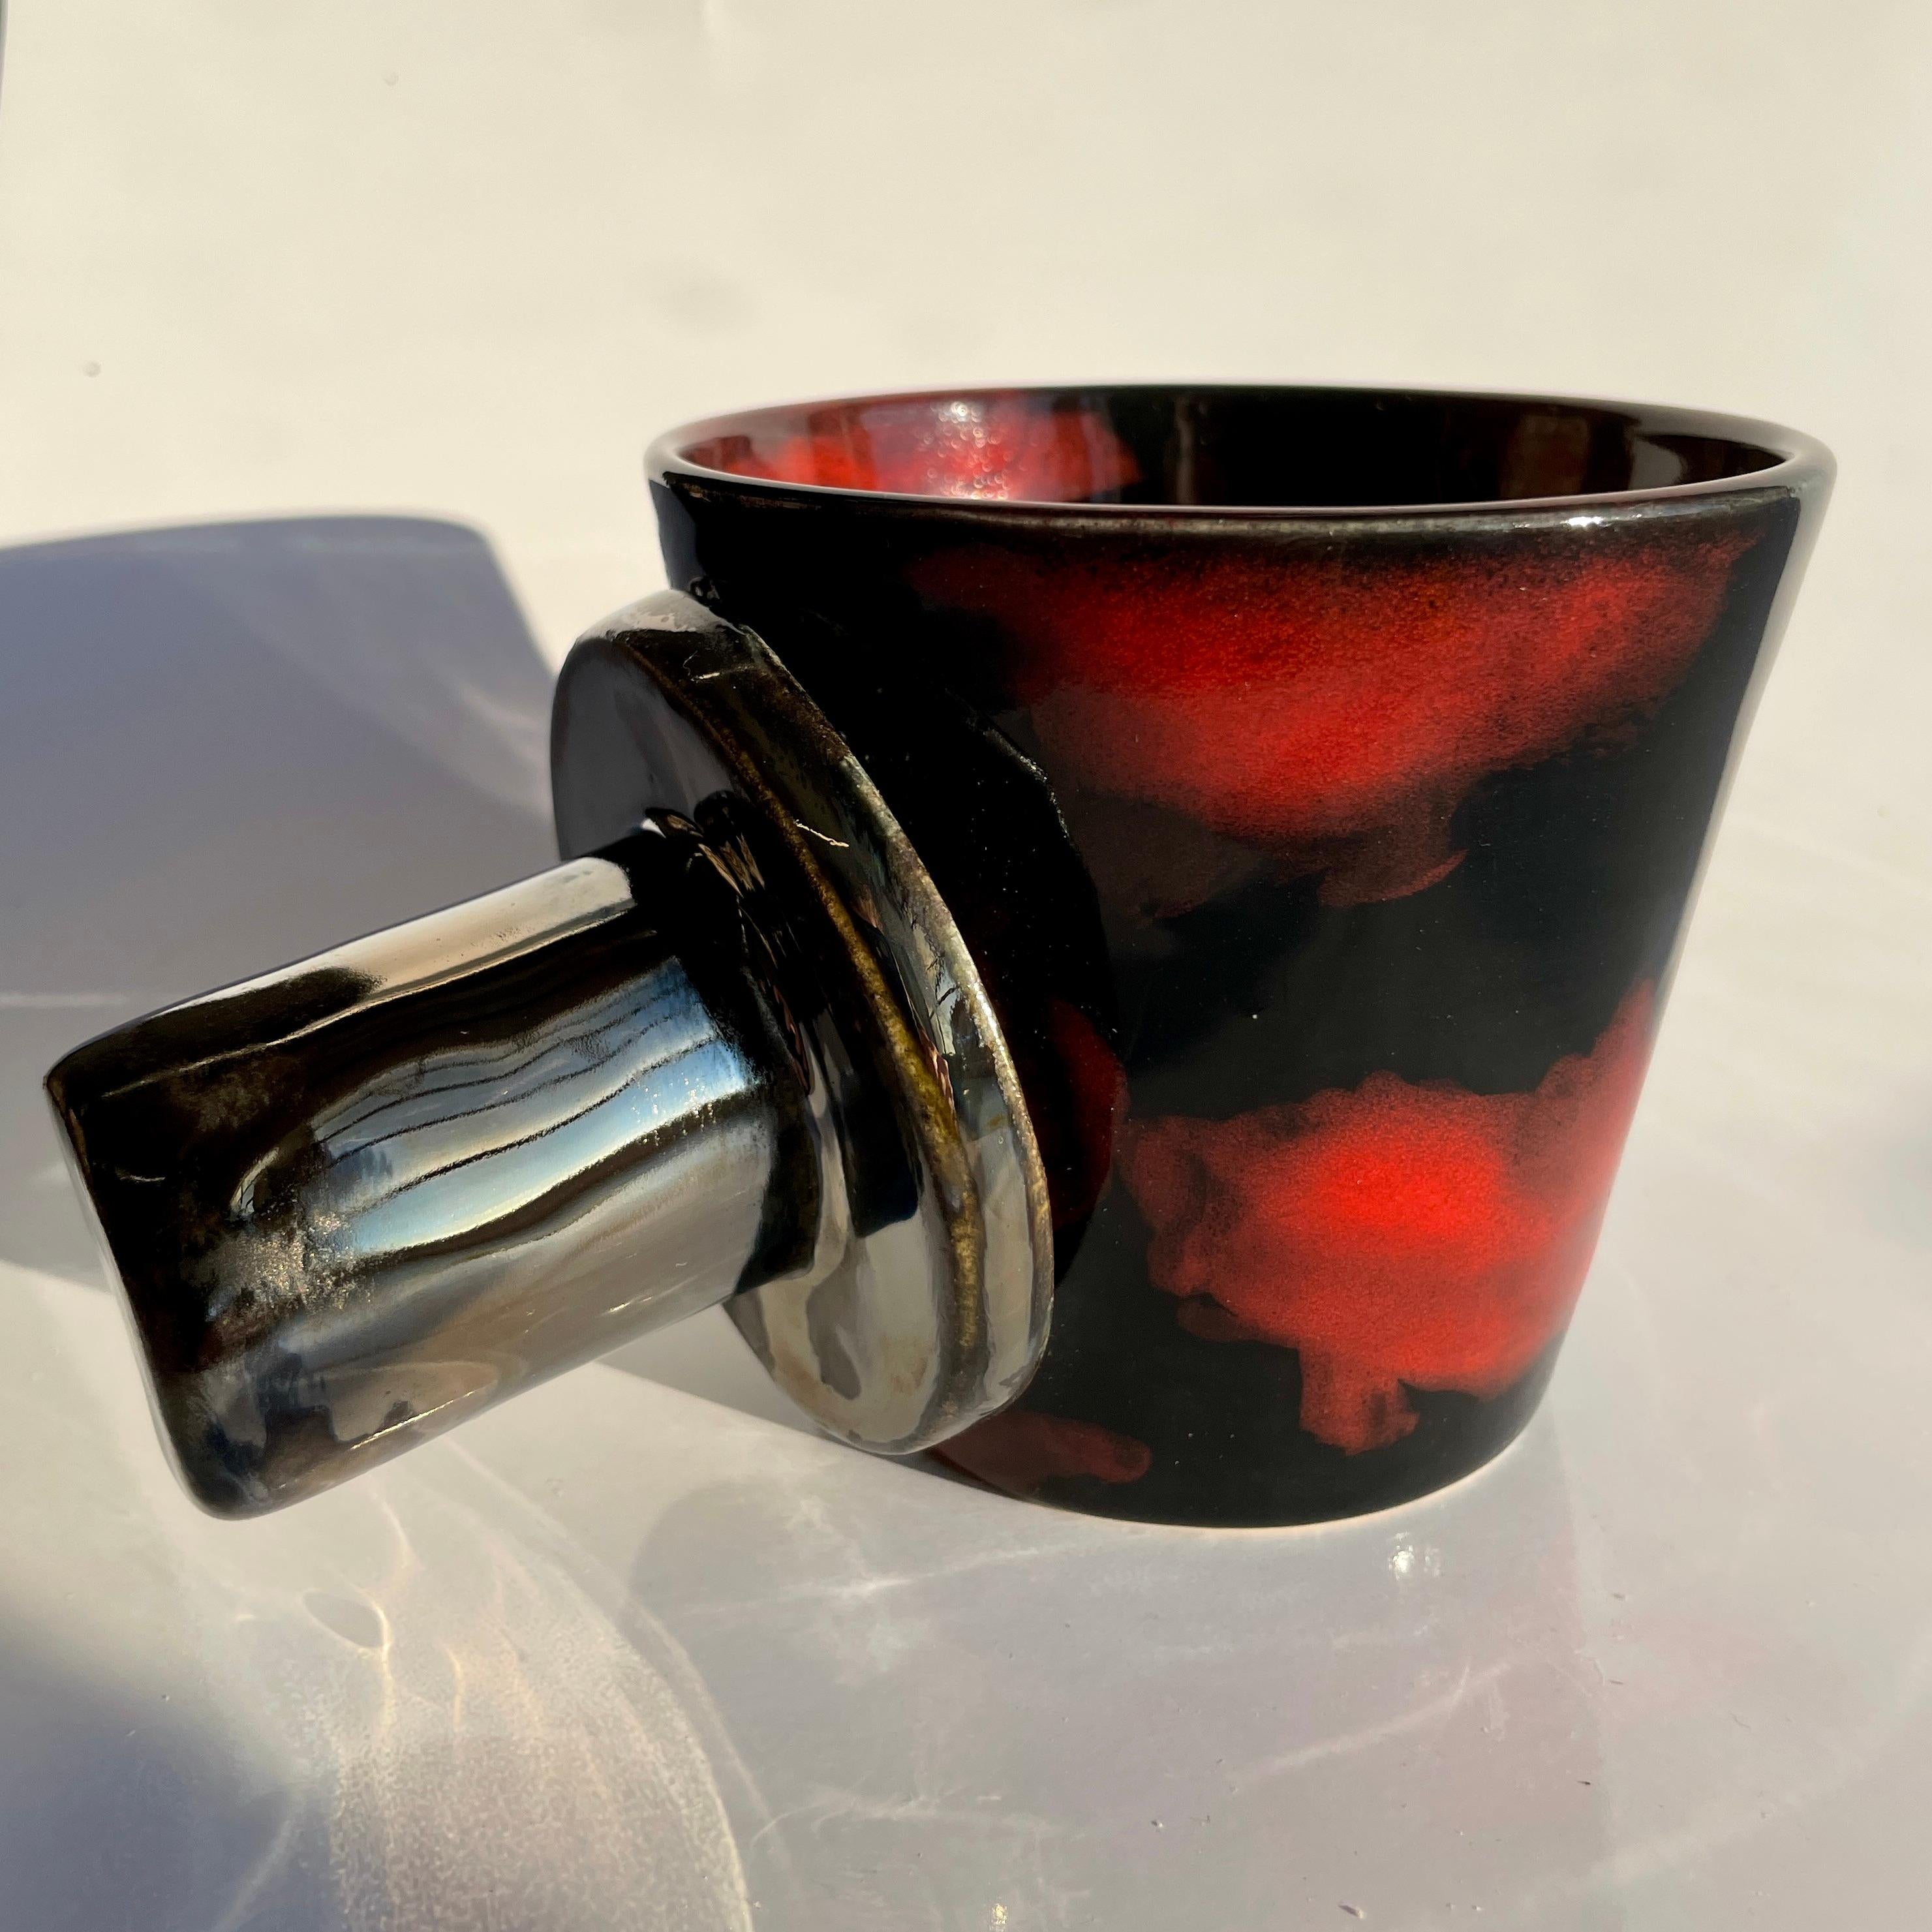 The BIB V, shown here in Diffused China Red/Raven and Broken Silver, the food safe vessel for your favorite beverage of choice, entertaining, or as a decorative object or object d'art. Versatile, sustainable and one of kind, made of recycled